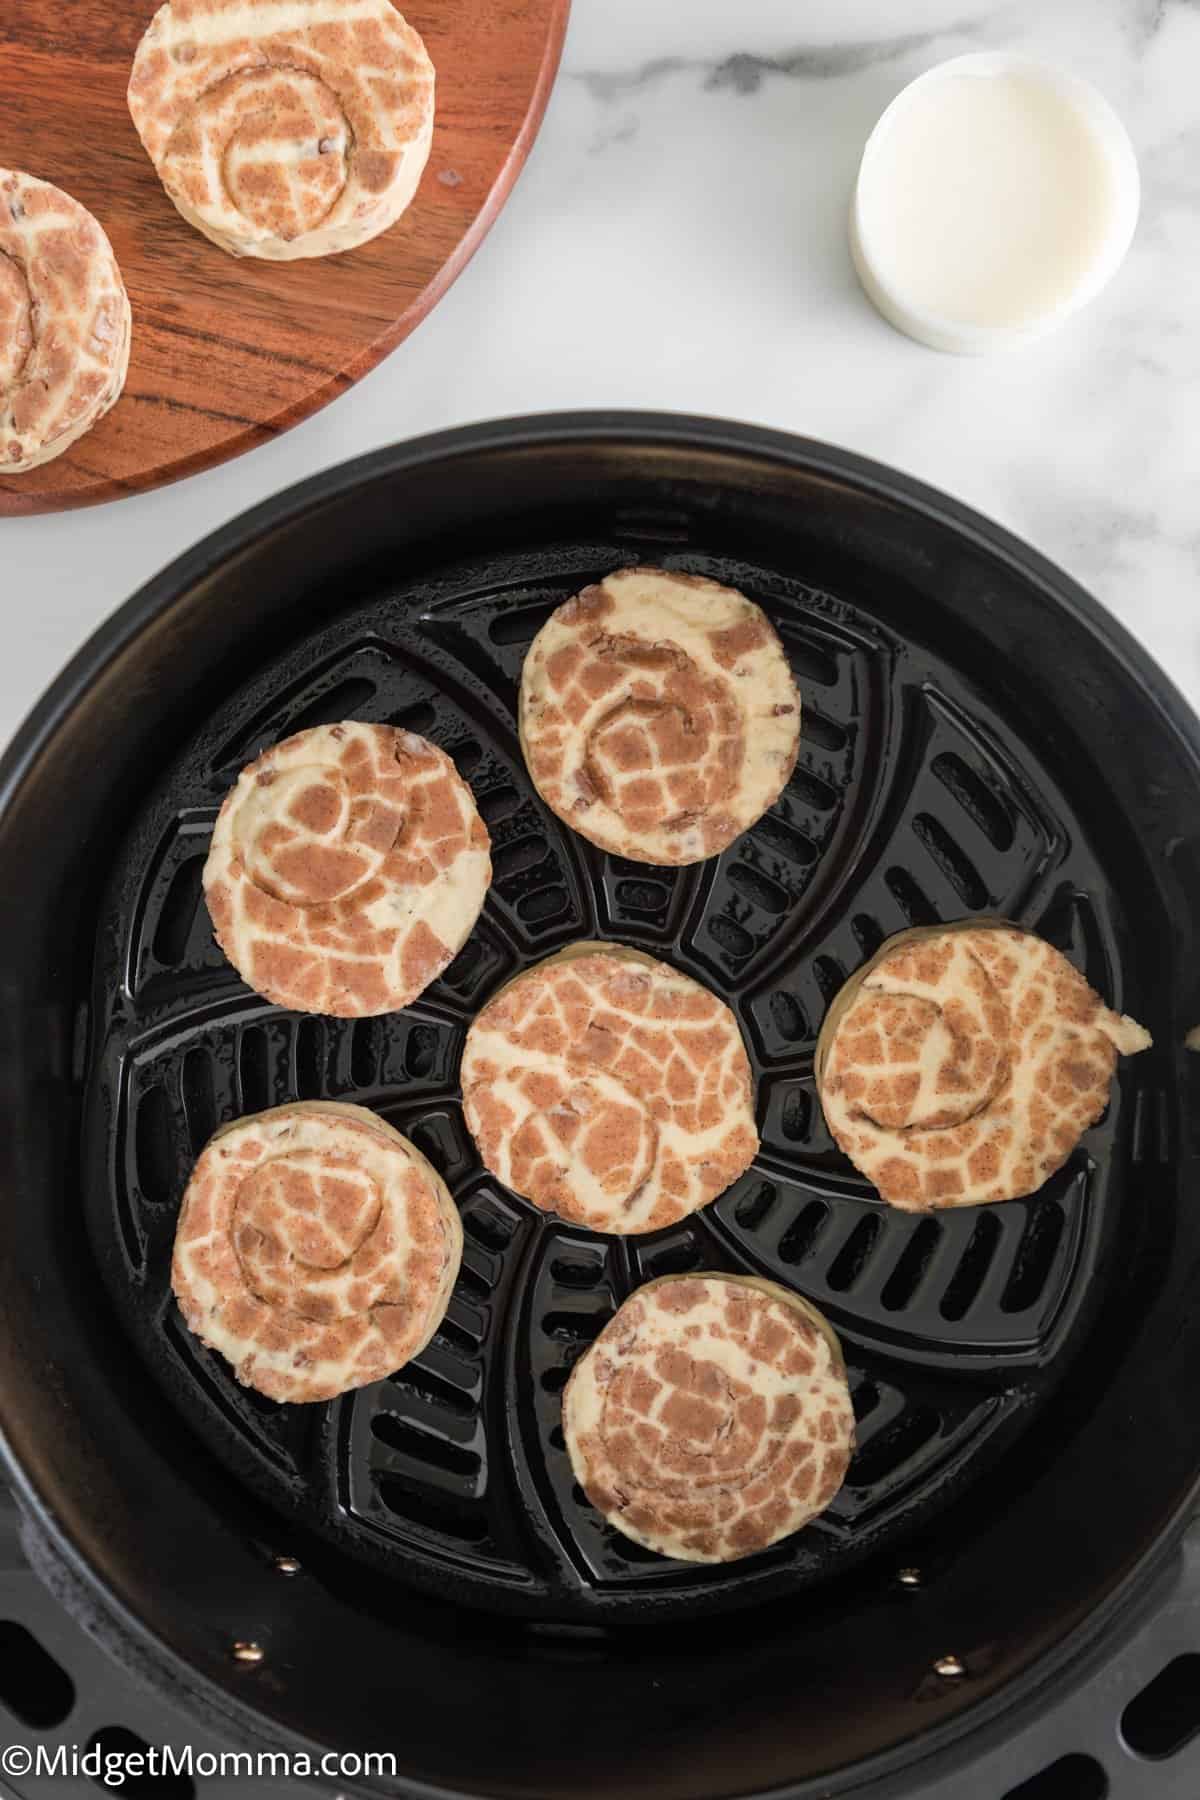 uncooked cinnamon rolls in the basket of an air fryer